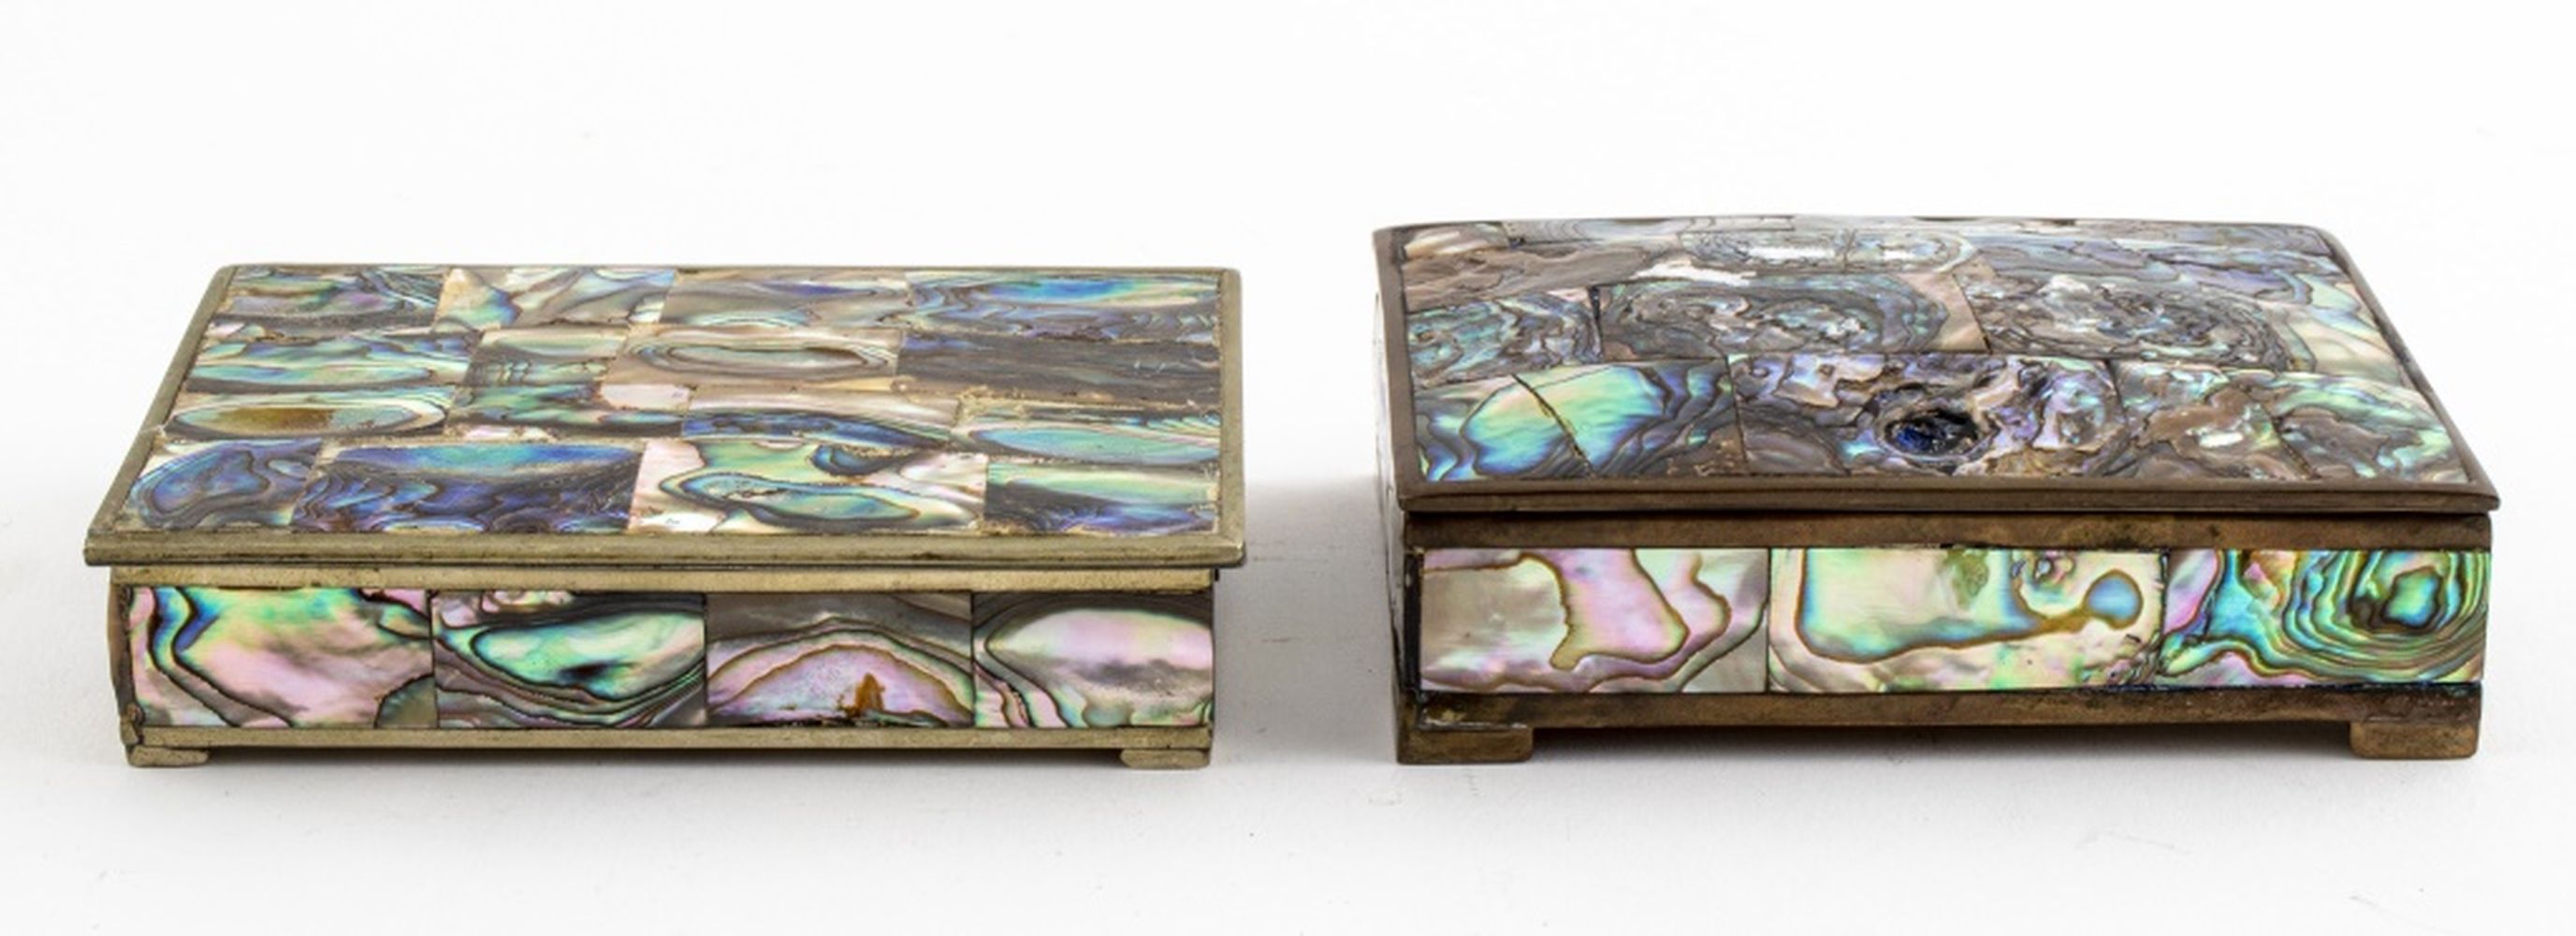 MOTHER OF PEARL DECORATIVE BOXES  2bbe2a